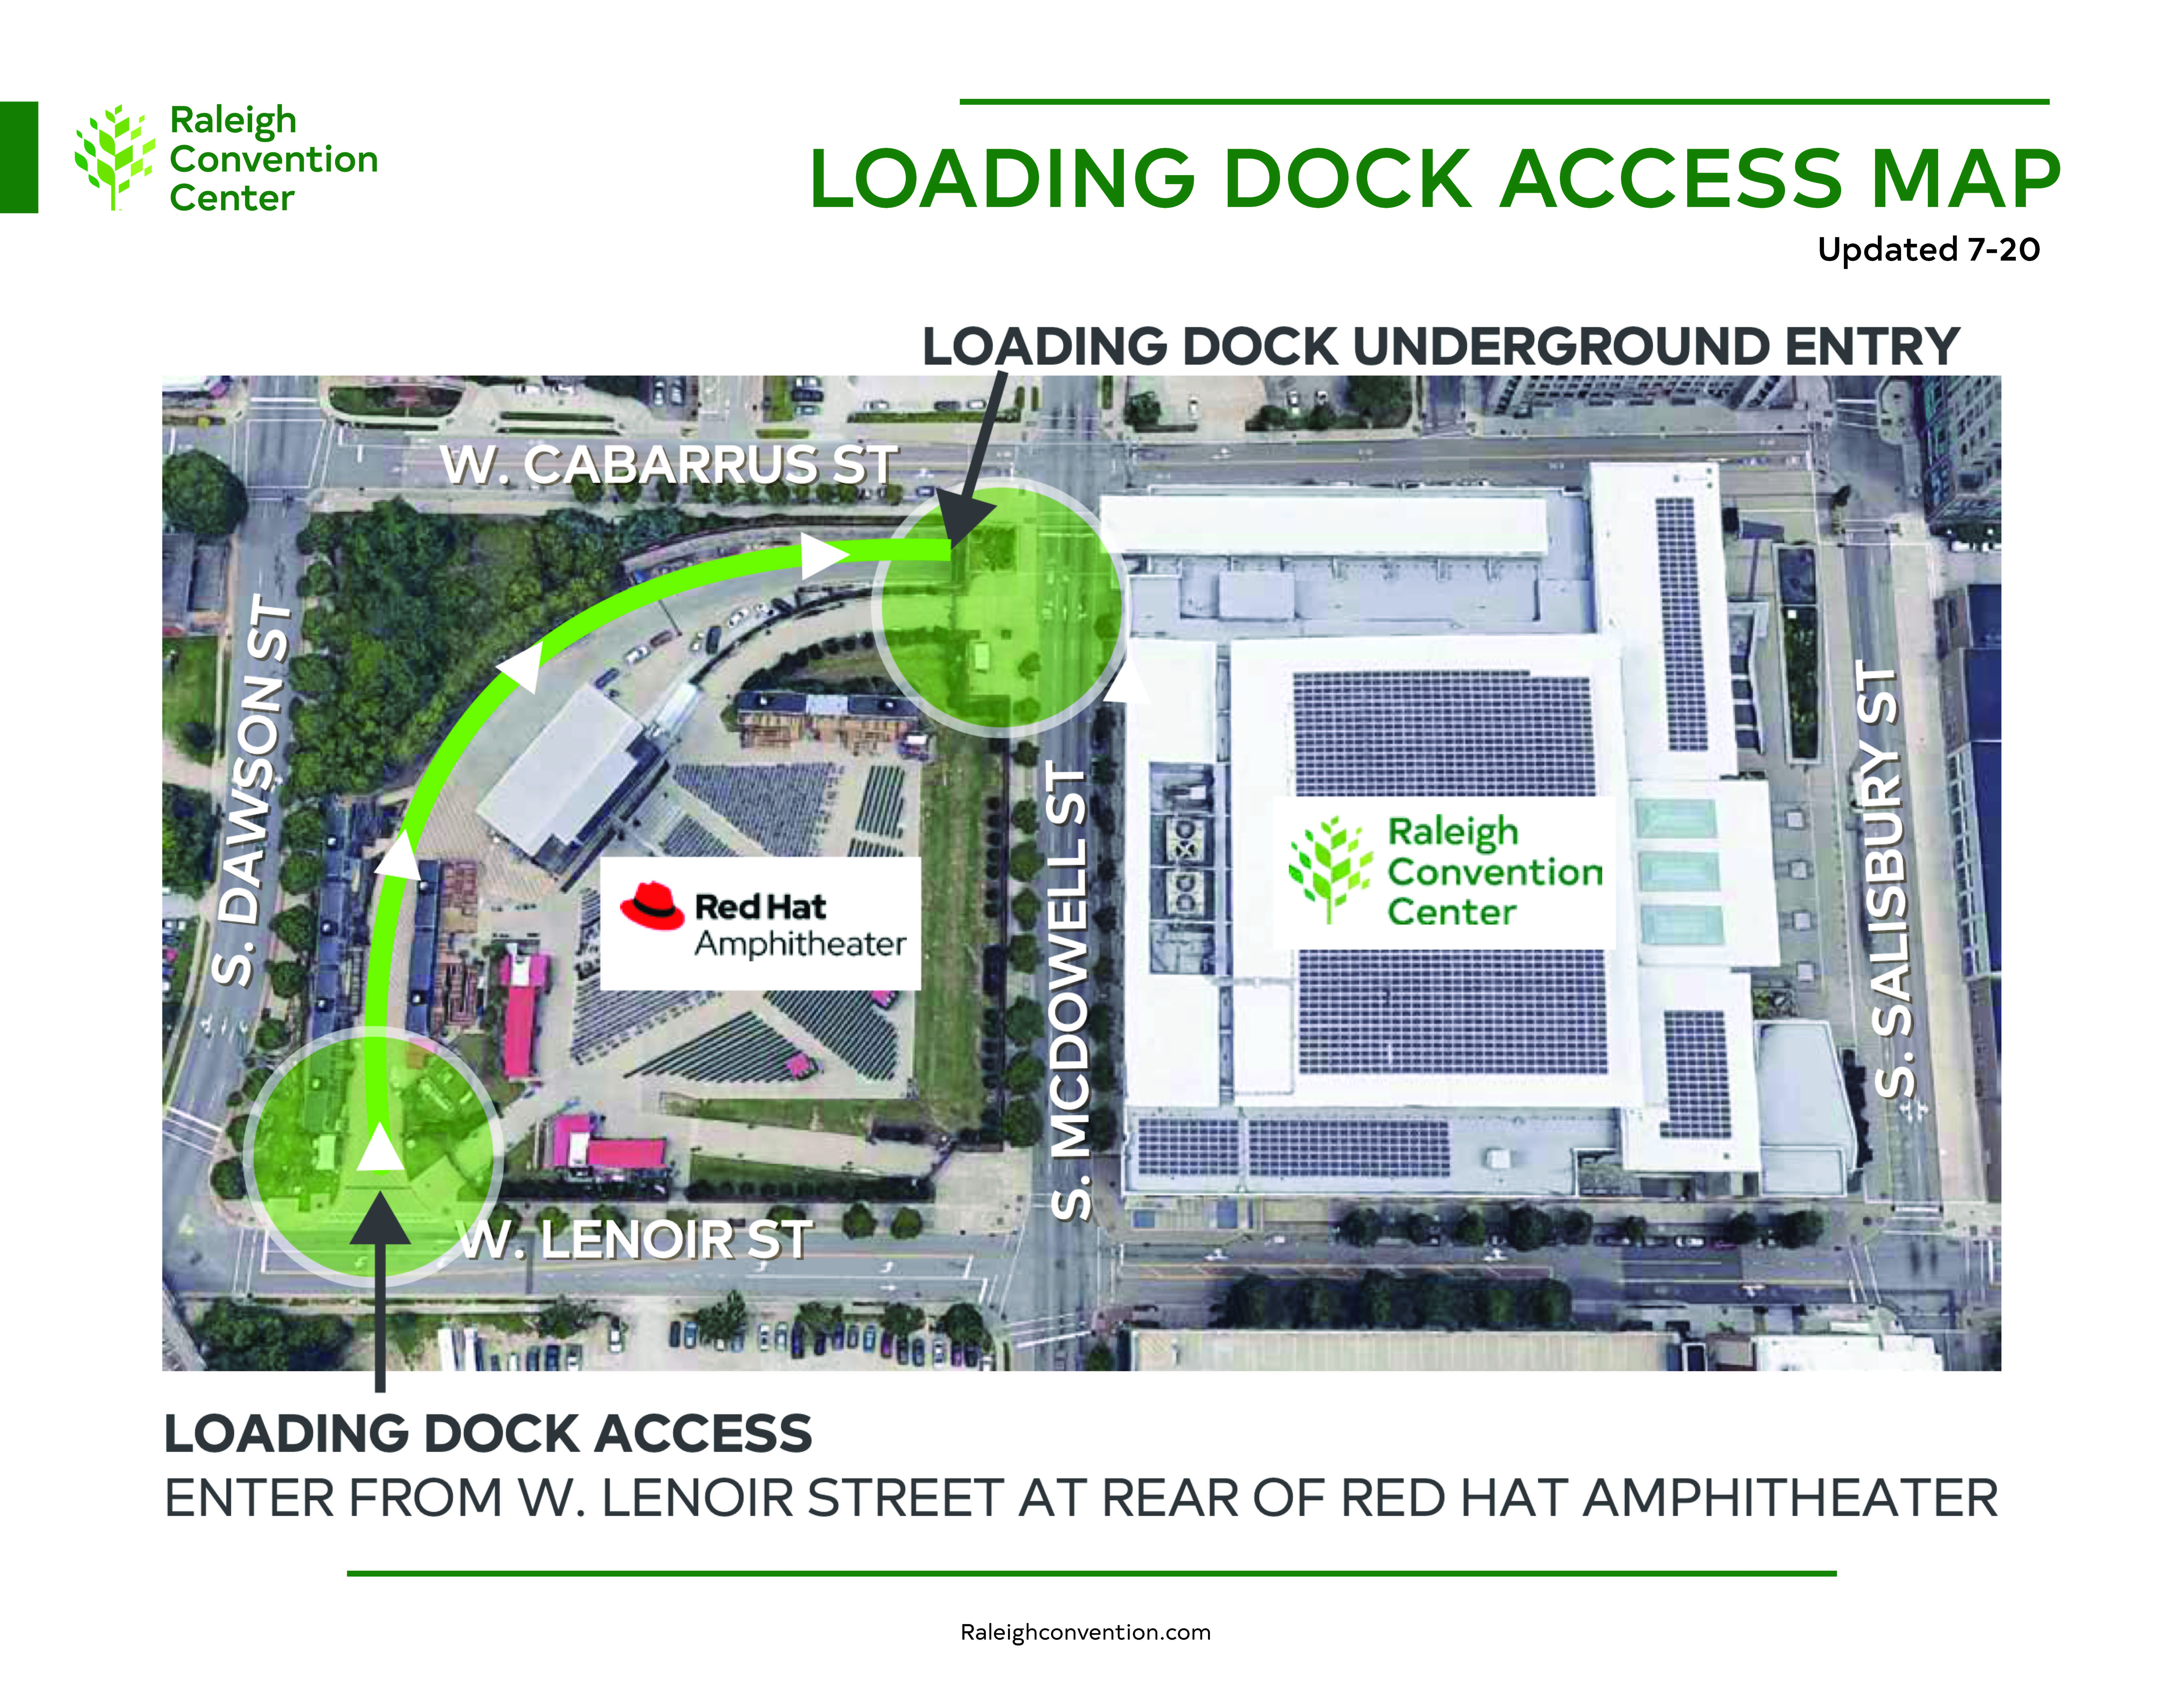 Map indicating entry to RCC Loading Dock at rear of Red Hat Amphitheater